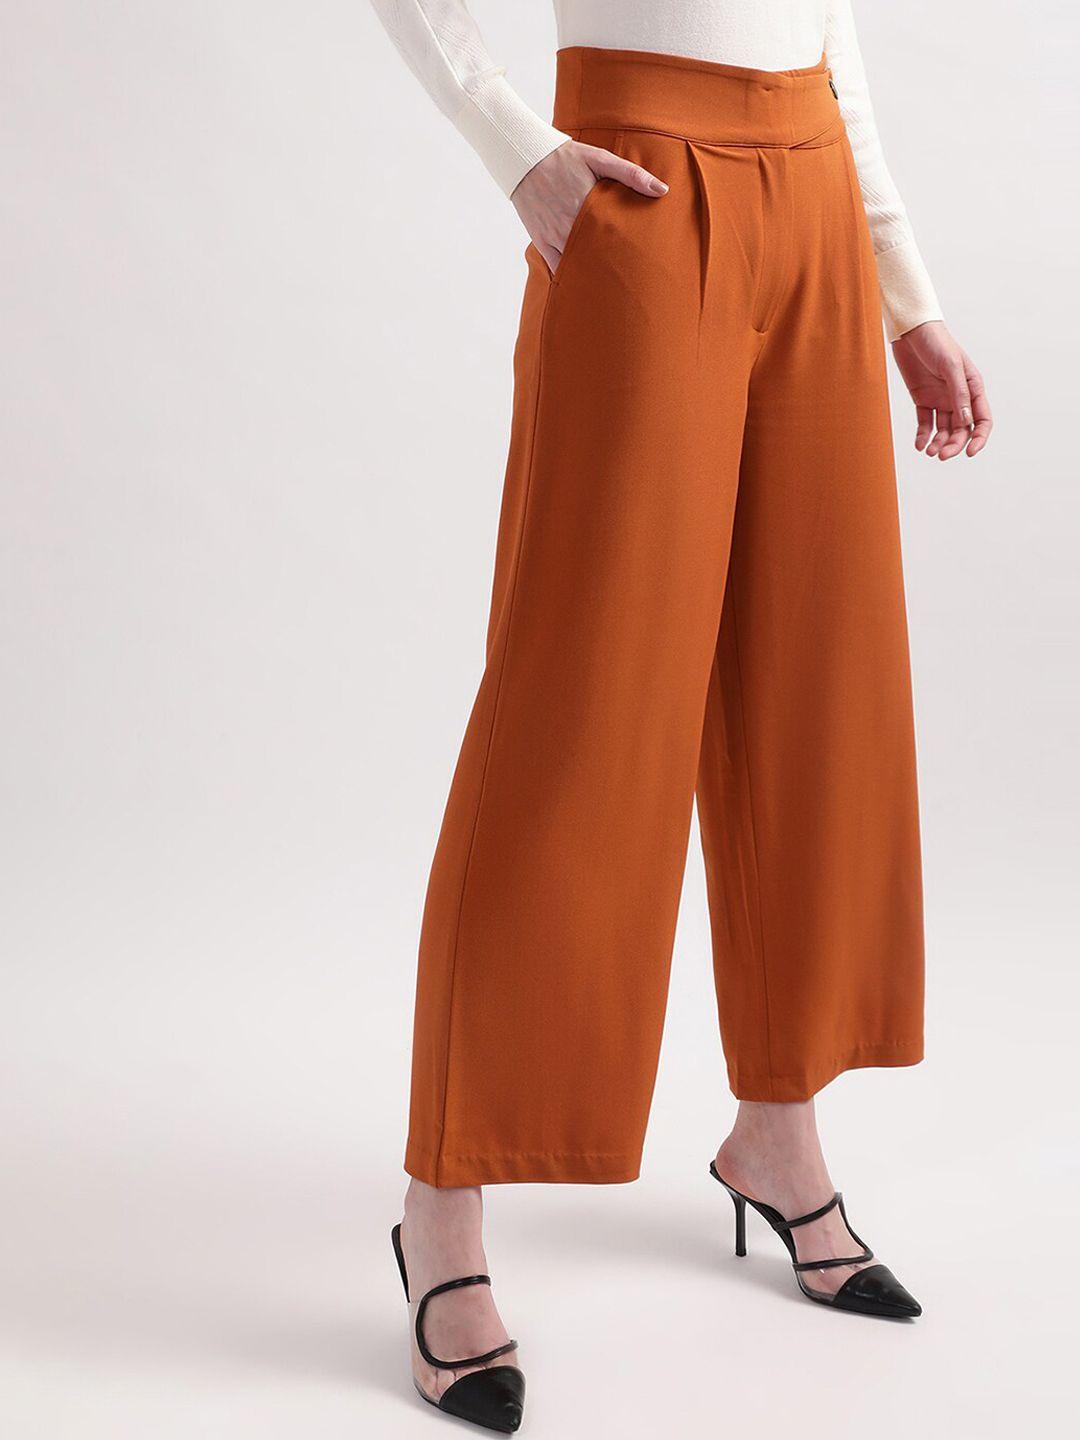 centrestage women mustard yellow flared pleated trousers